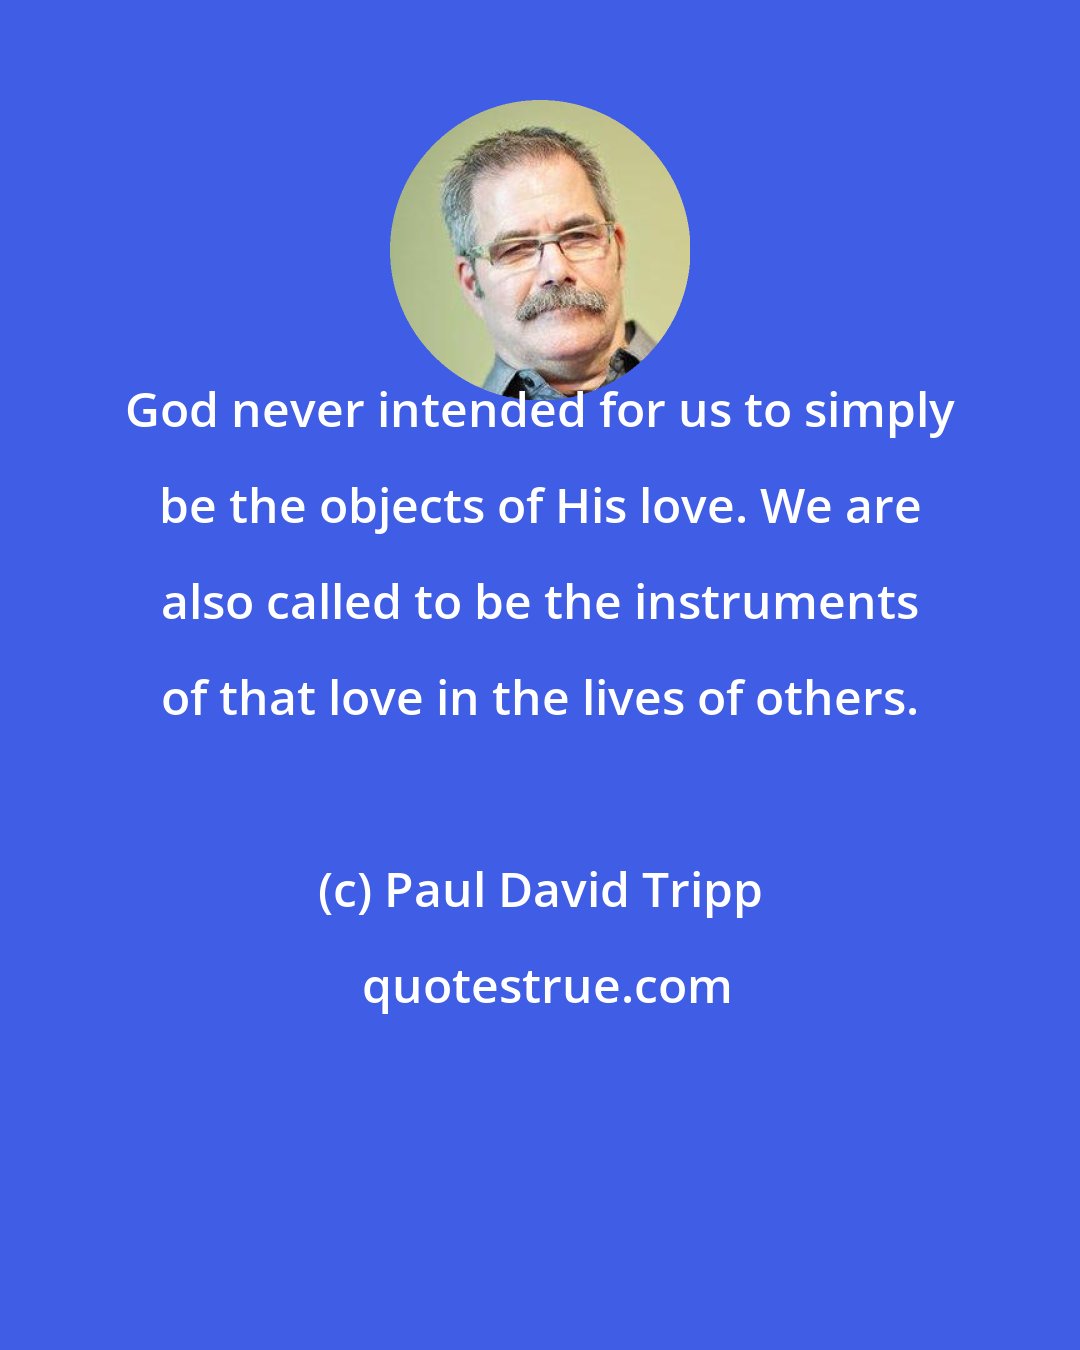 Paul David Tripp: God never intended for us to simply be the objects of His love. We are also called to be the instruments of that love in the lives of others.